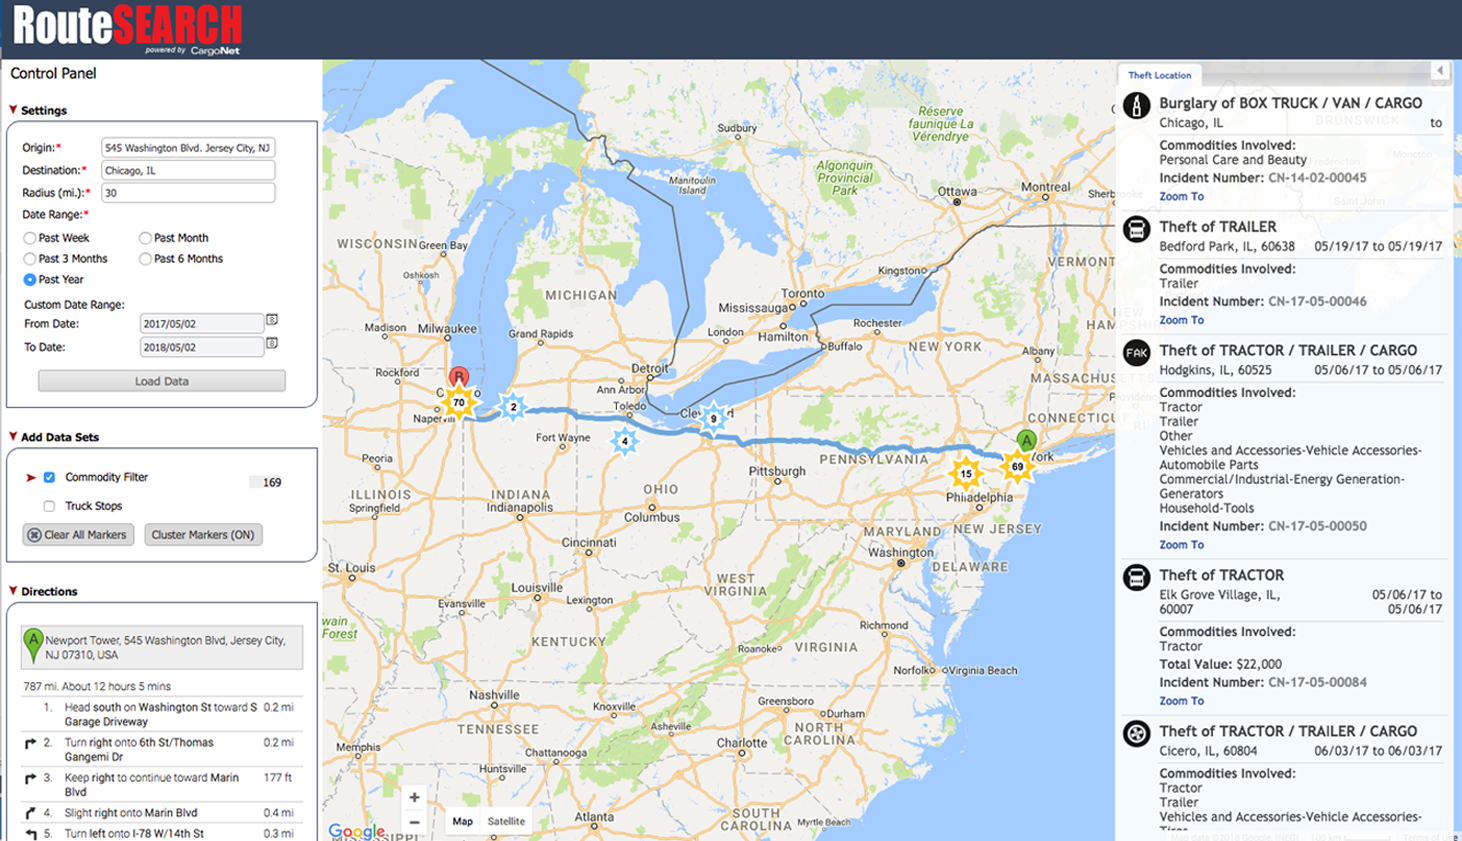 RouteSearch Screenshot Jersey City to Chicago